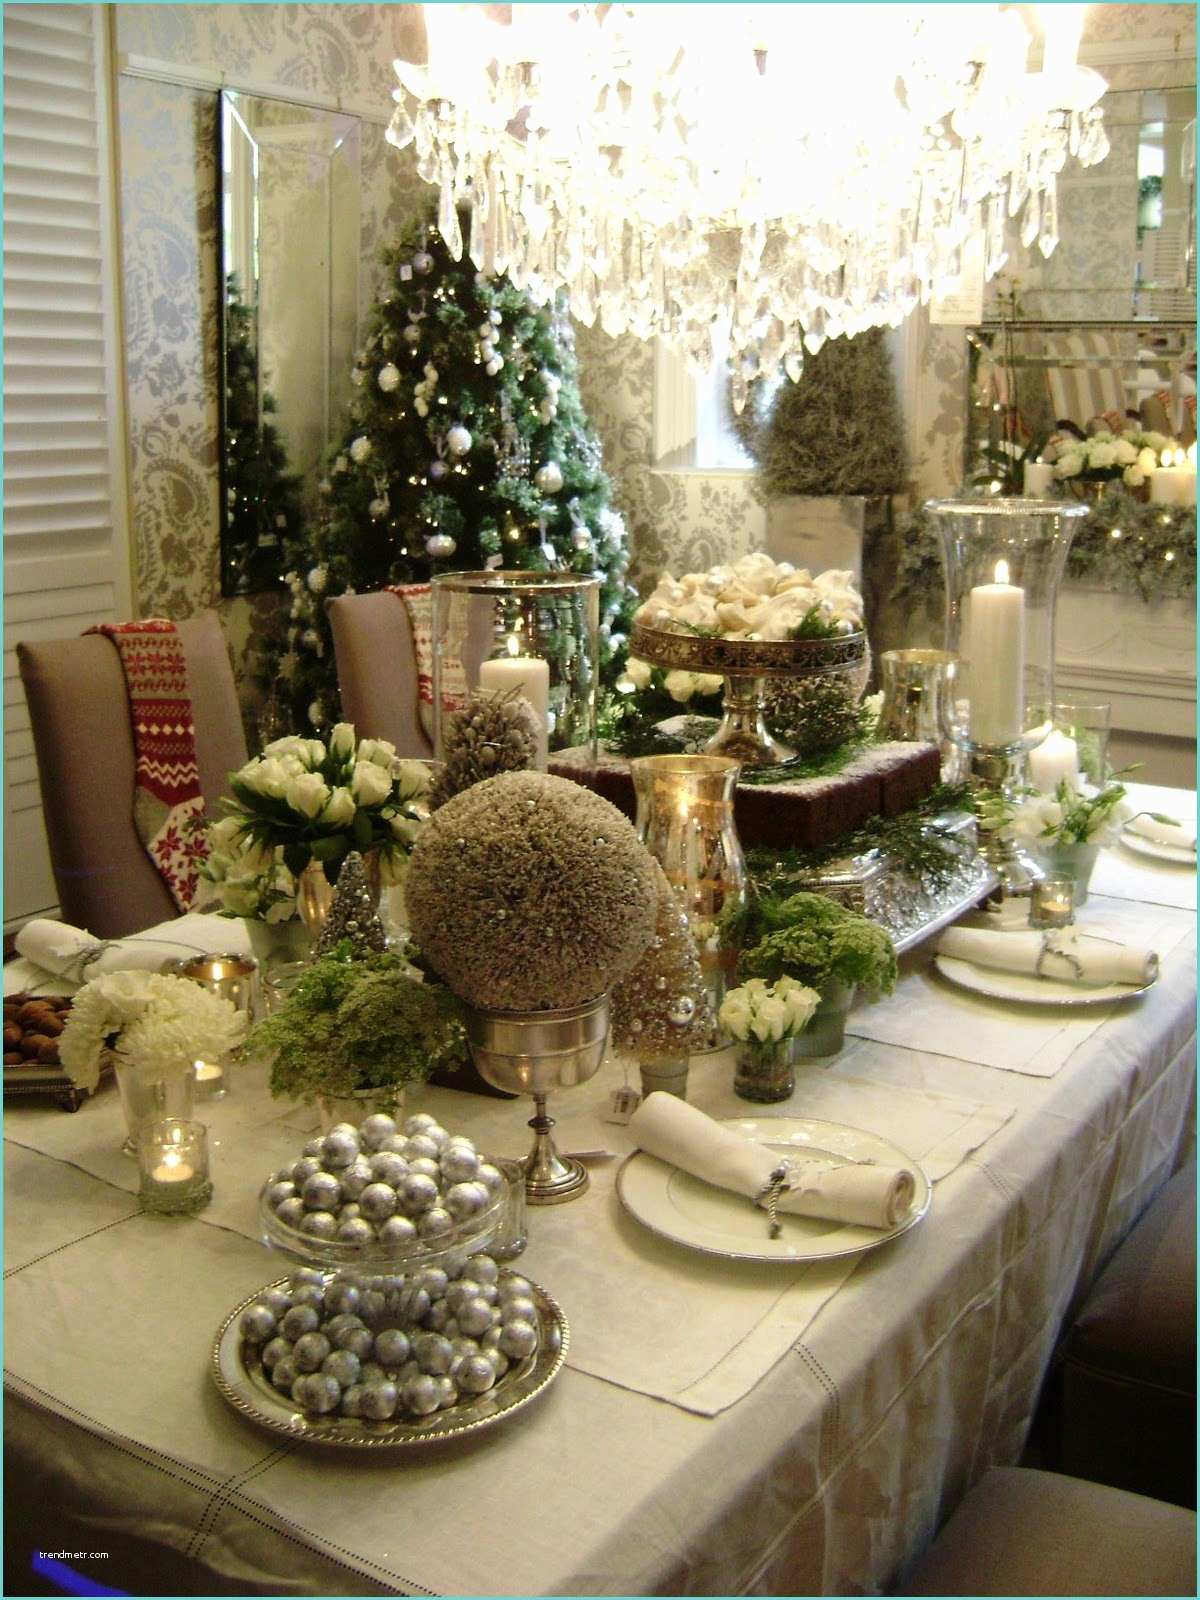 Ides Dcoration Table Noel Beautiful Christmas Decor for Home Dining Room Table